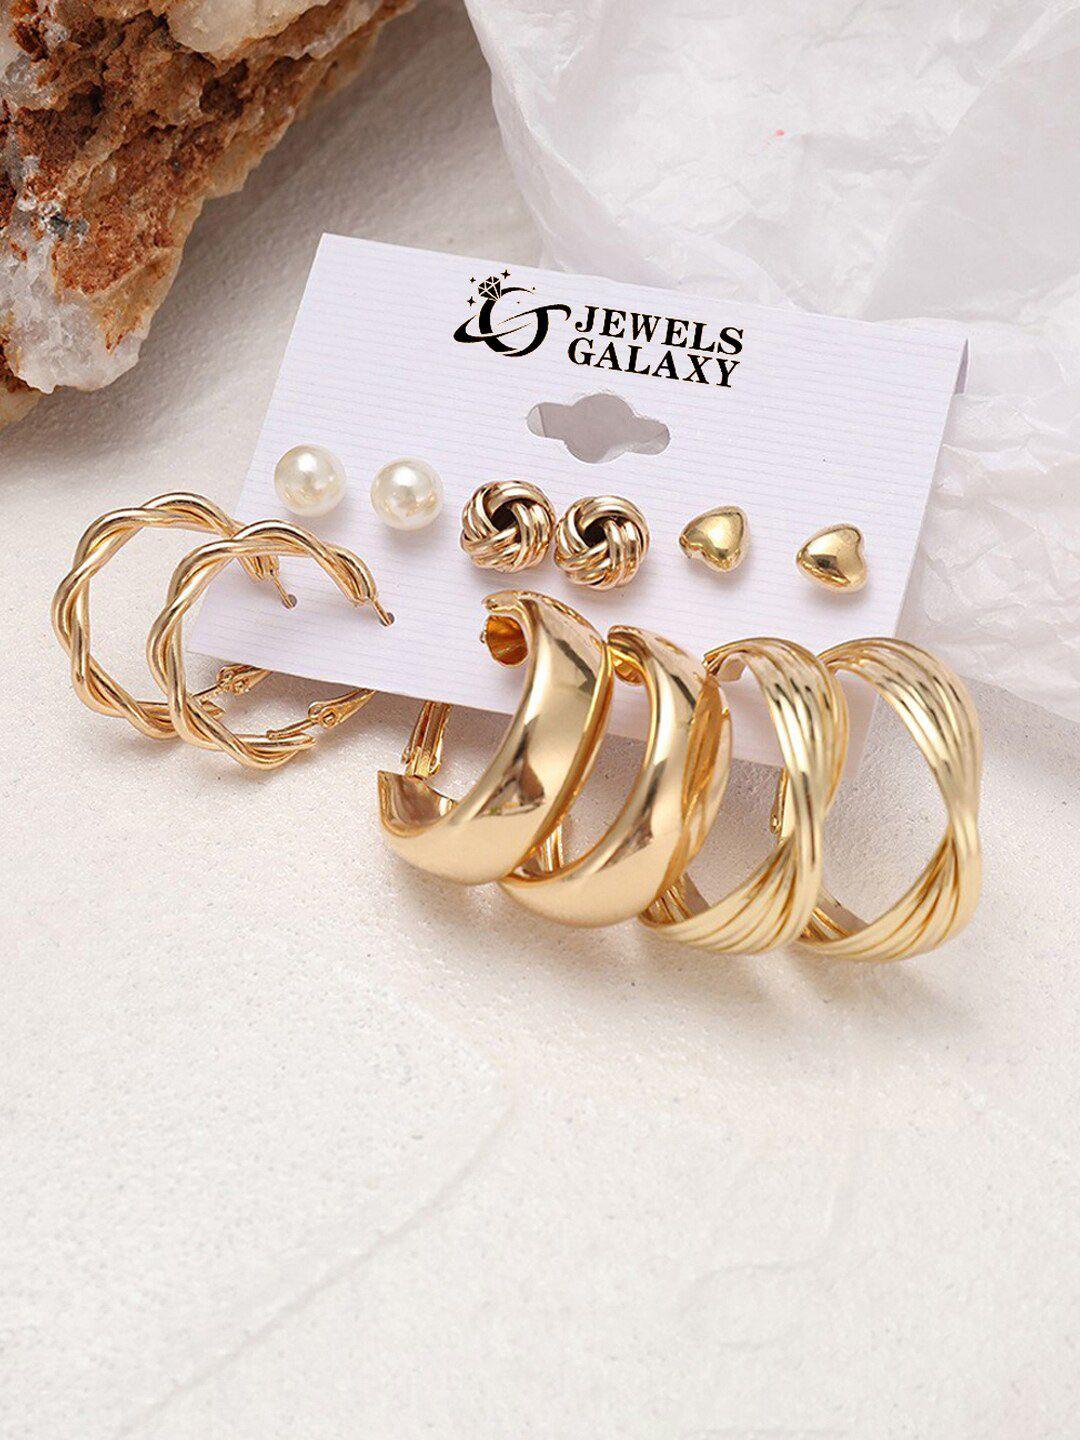 jewels galaxy set of 6 gold-toned contemporary studs earrings